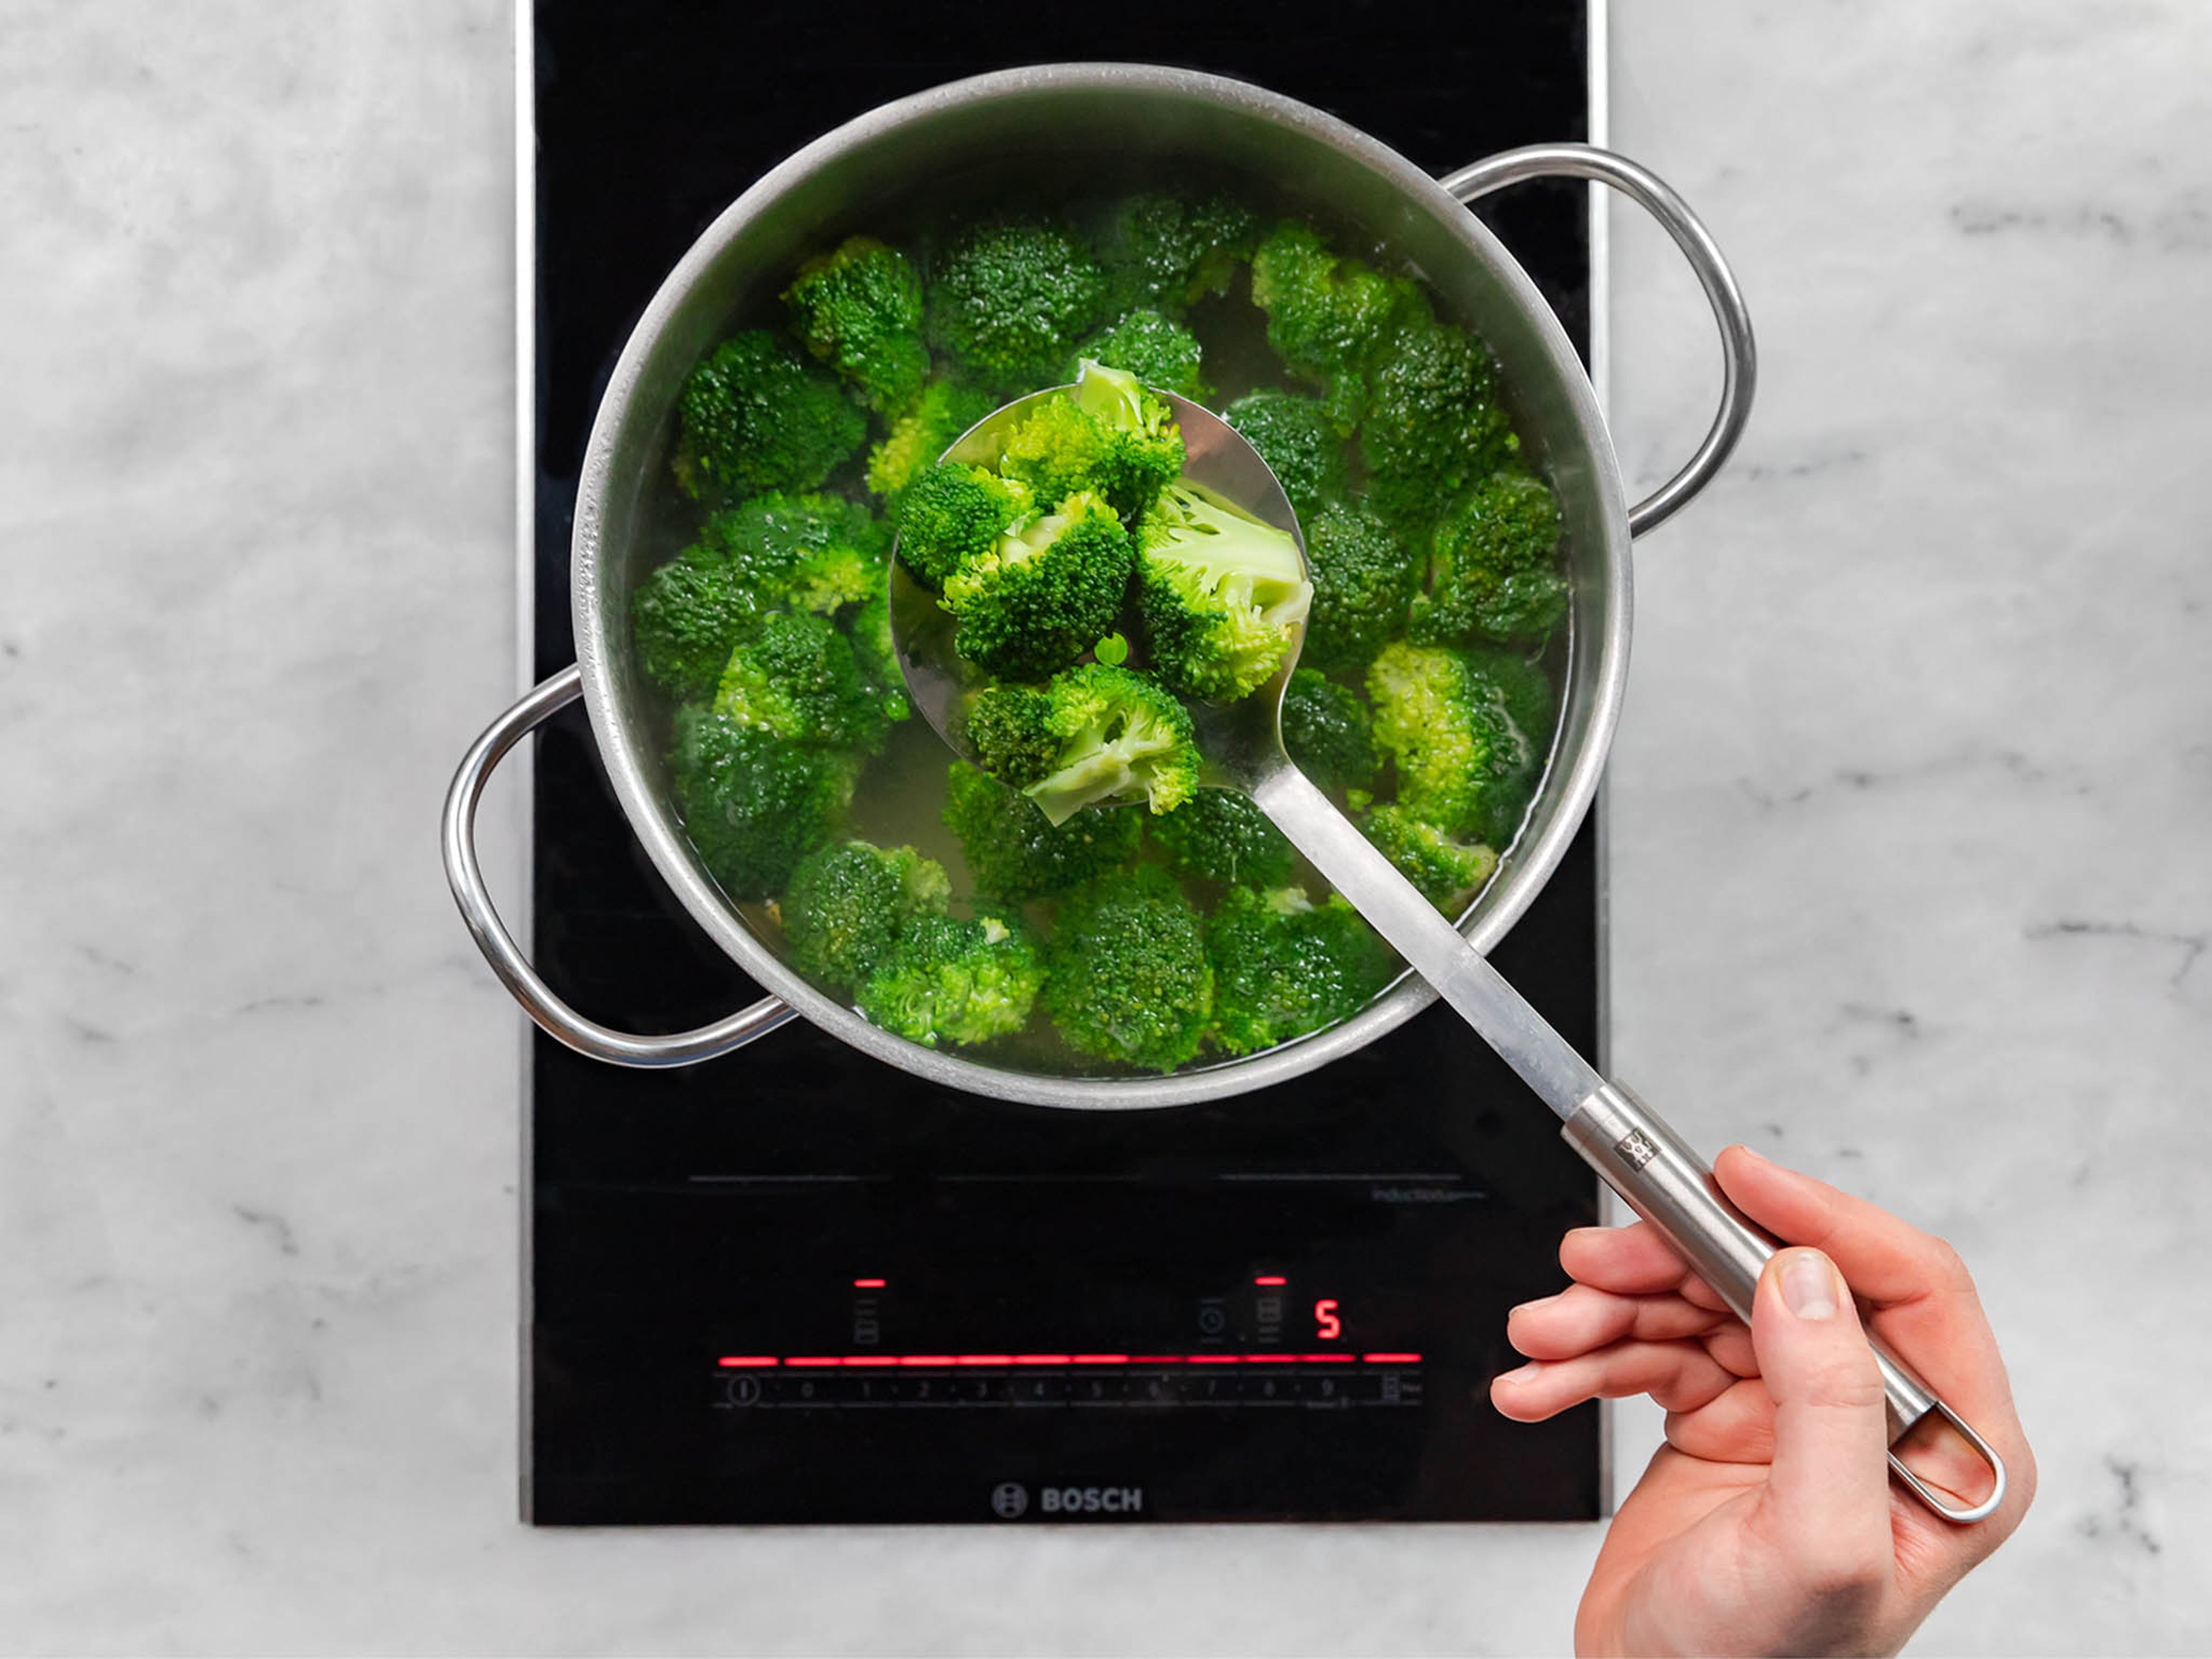 Bring a pot of salted water to boil. Blanch broccoli florets in water for approx. 3 min., then transfer to ice water. Once cool, cut florets into small pieces.